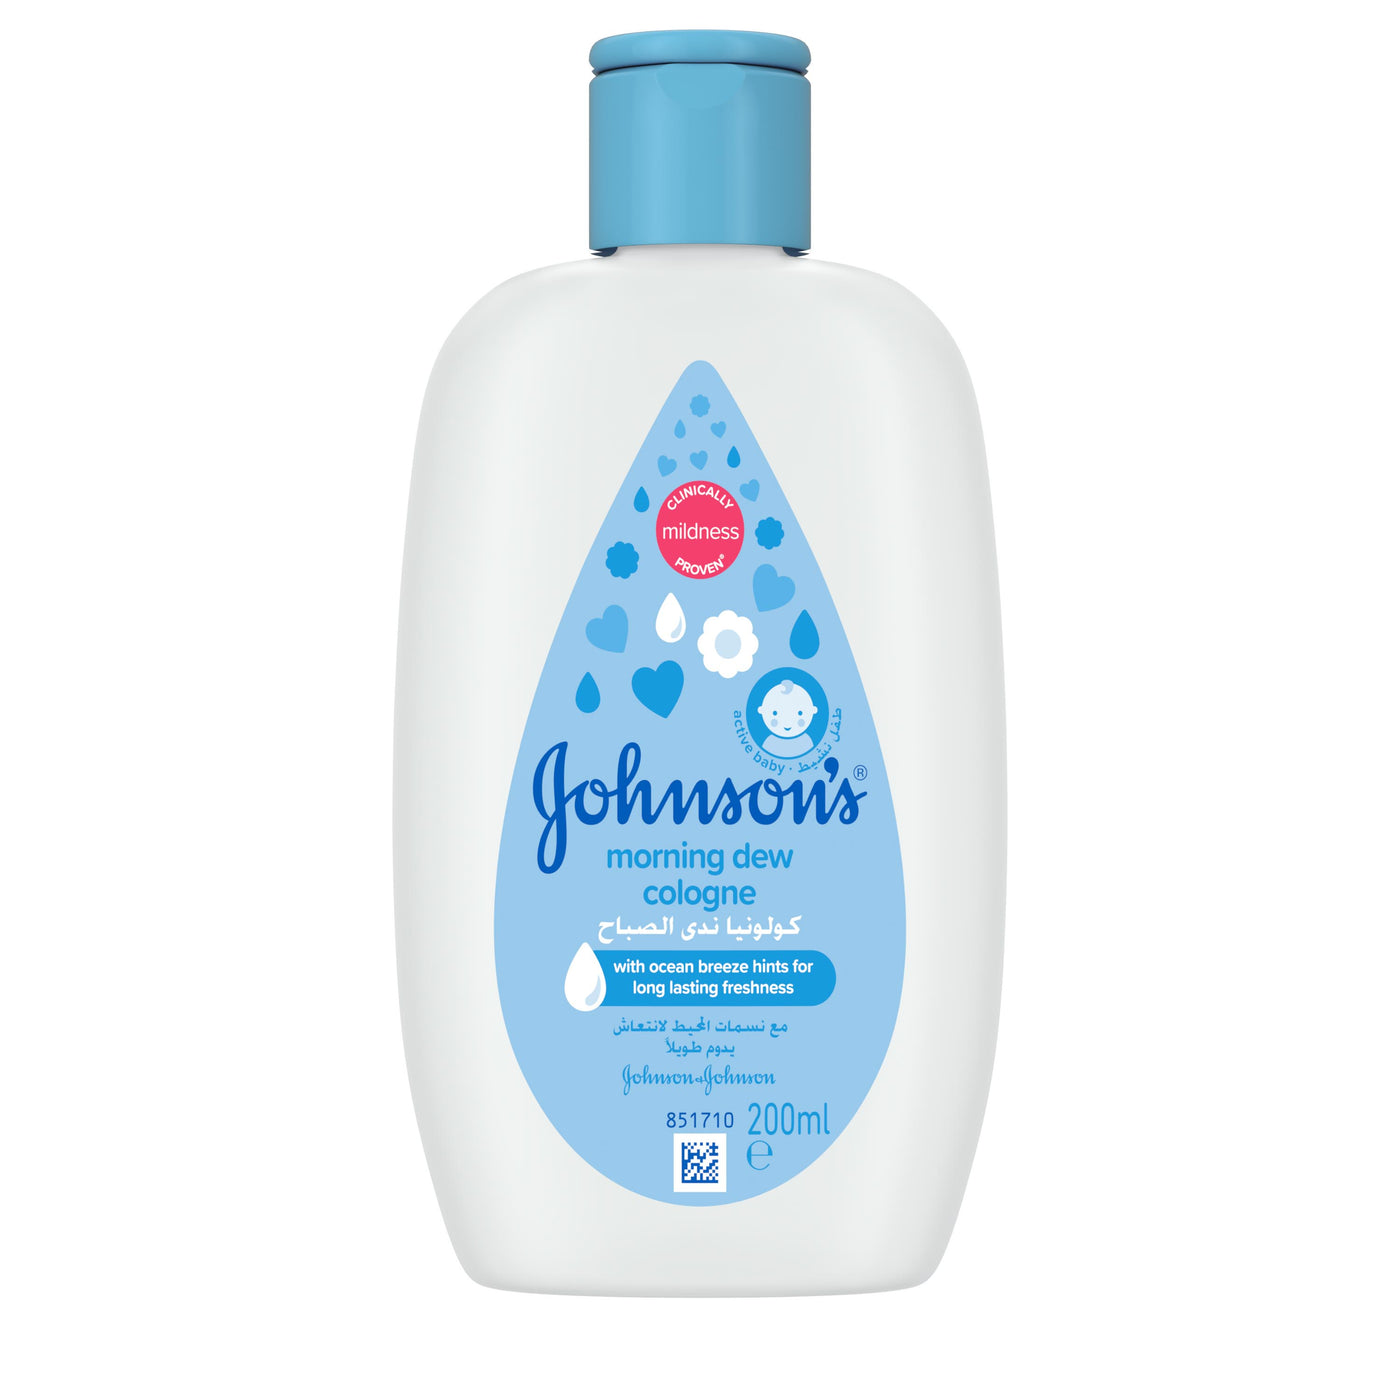 Johnson's Morning dew Baby Cologne